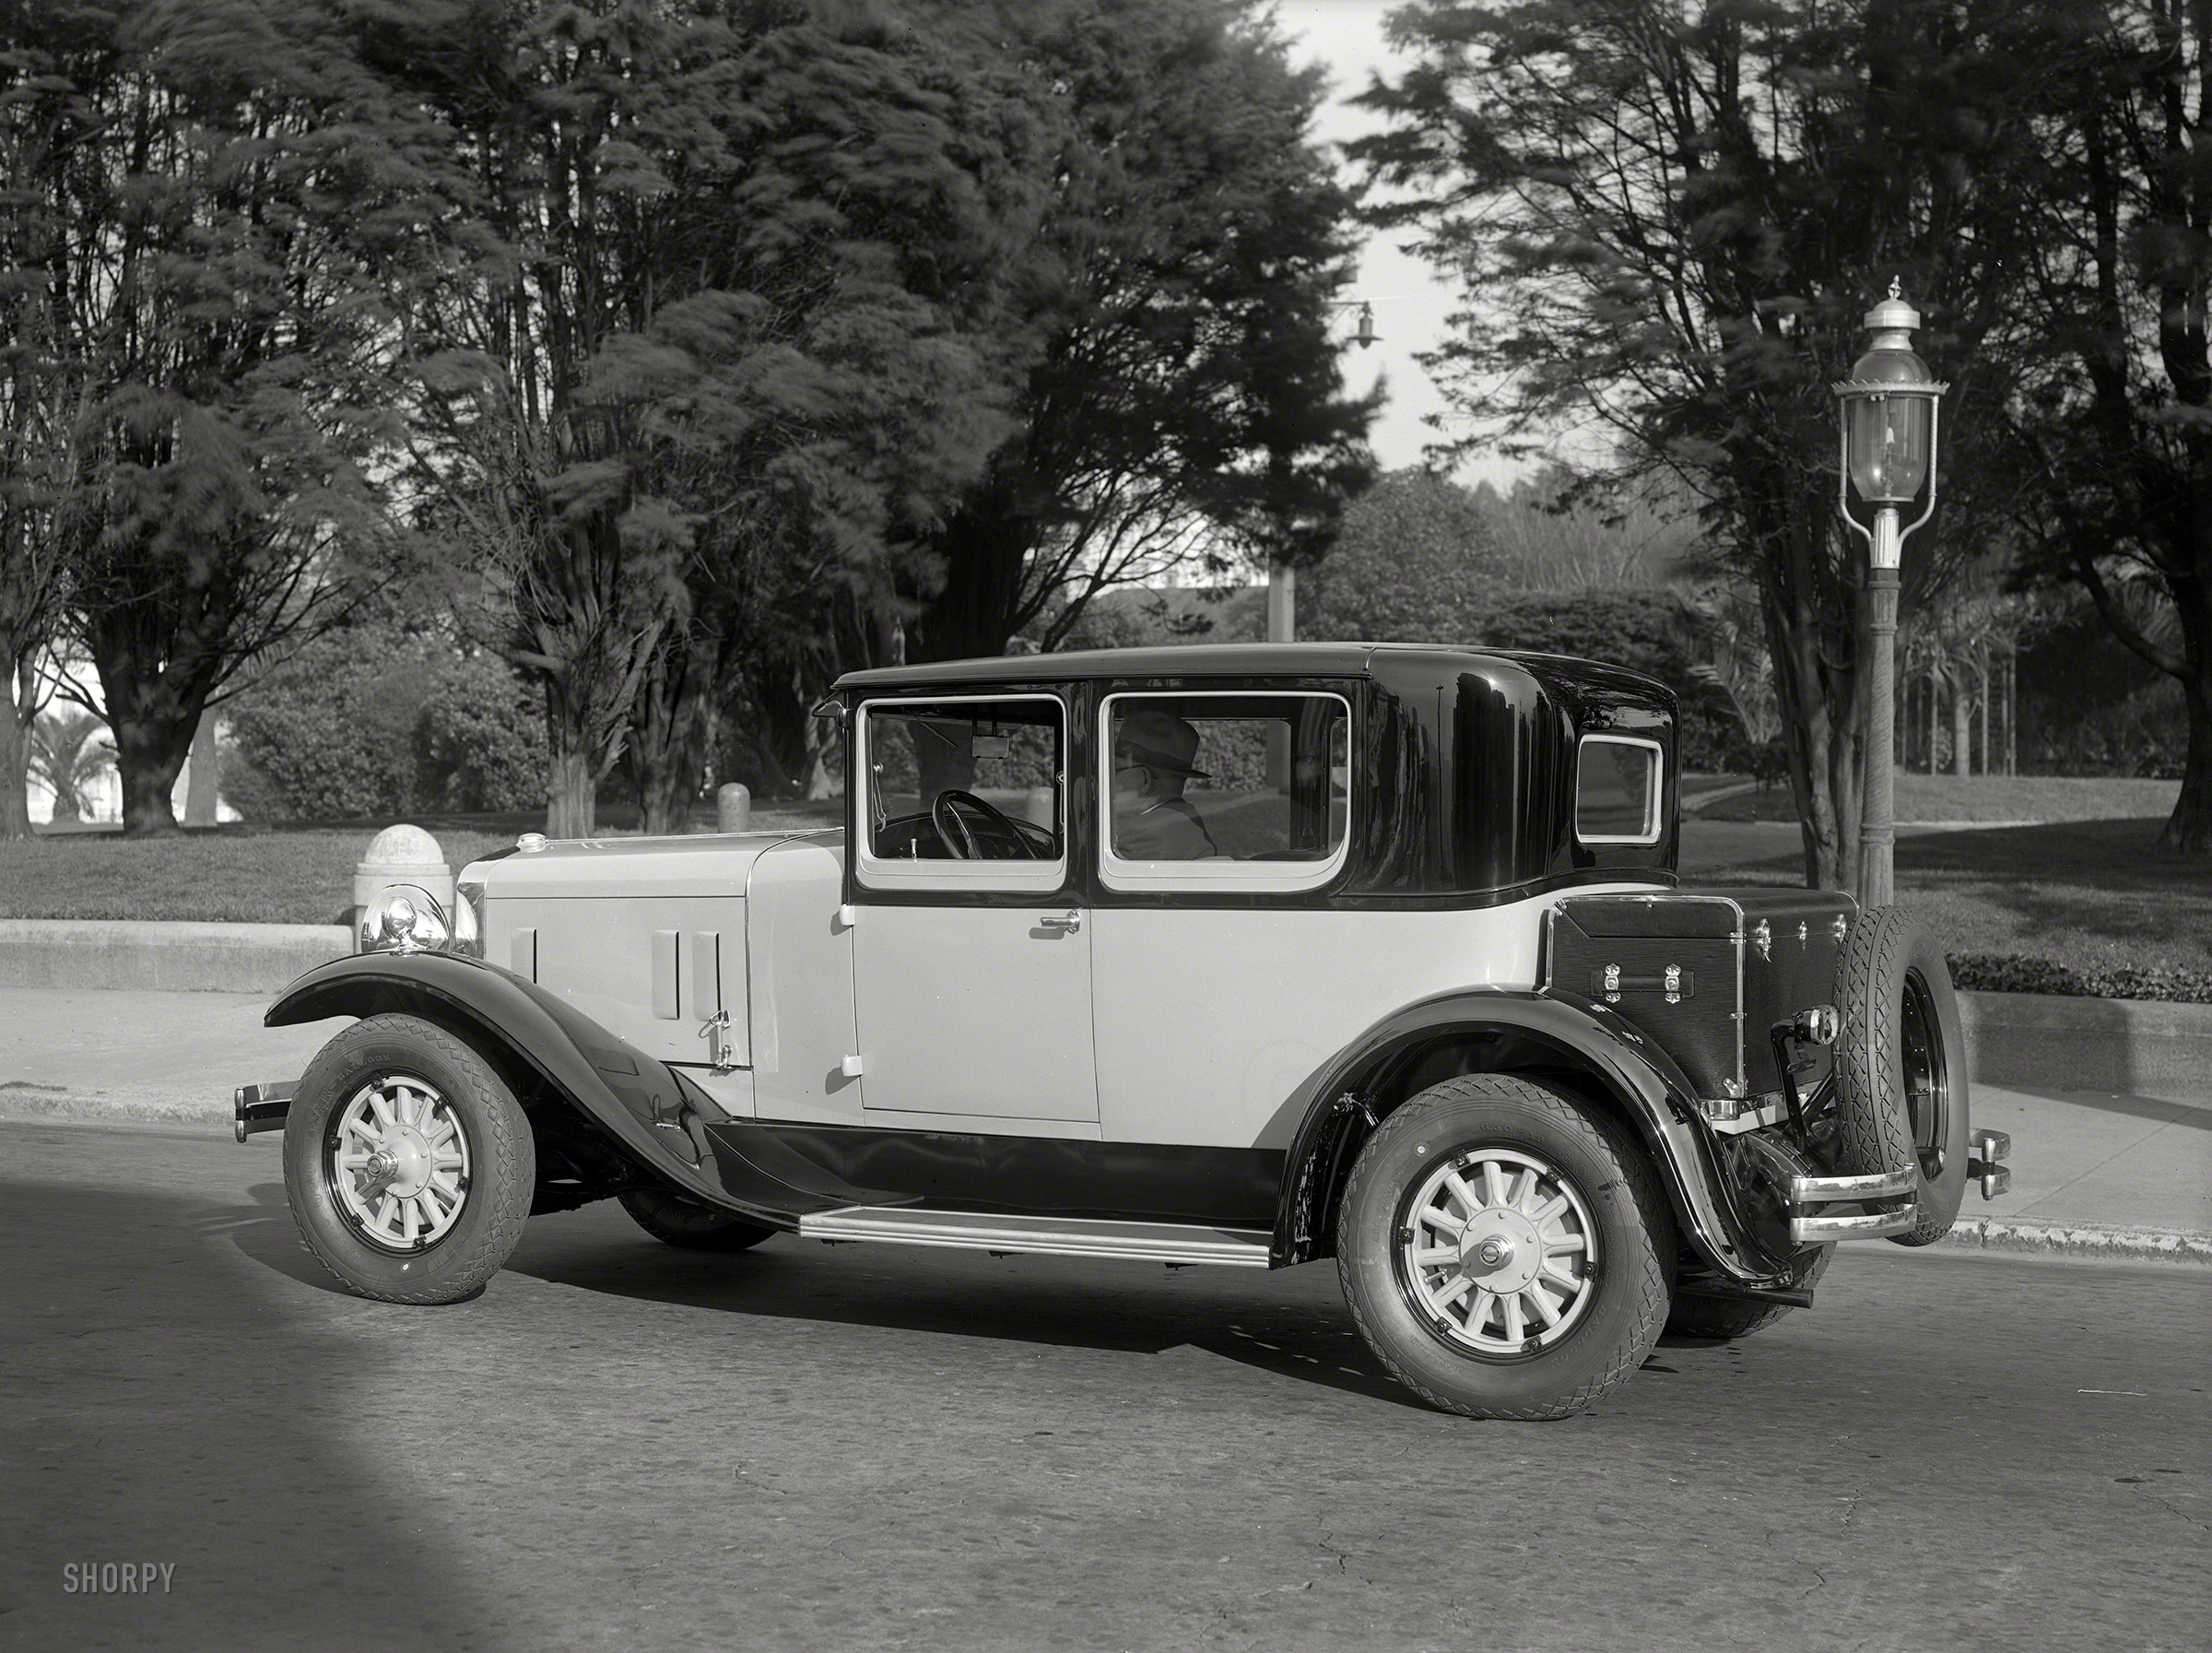 San Francisco, 1929. "Franklin Brougham at Lafayette Park." Its telltale bollards standing guard. 5x7 glass negative by Christopher Helin. View full size.